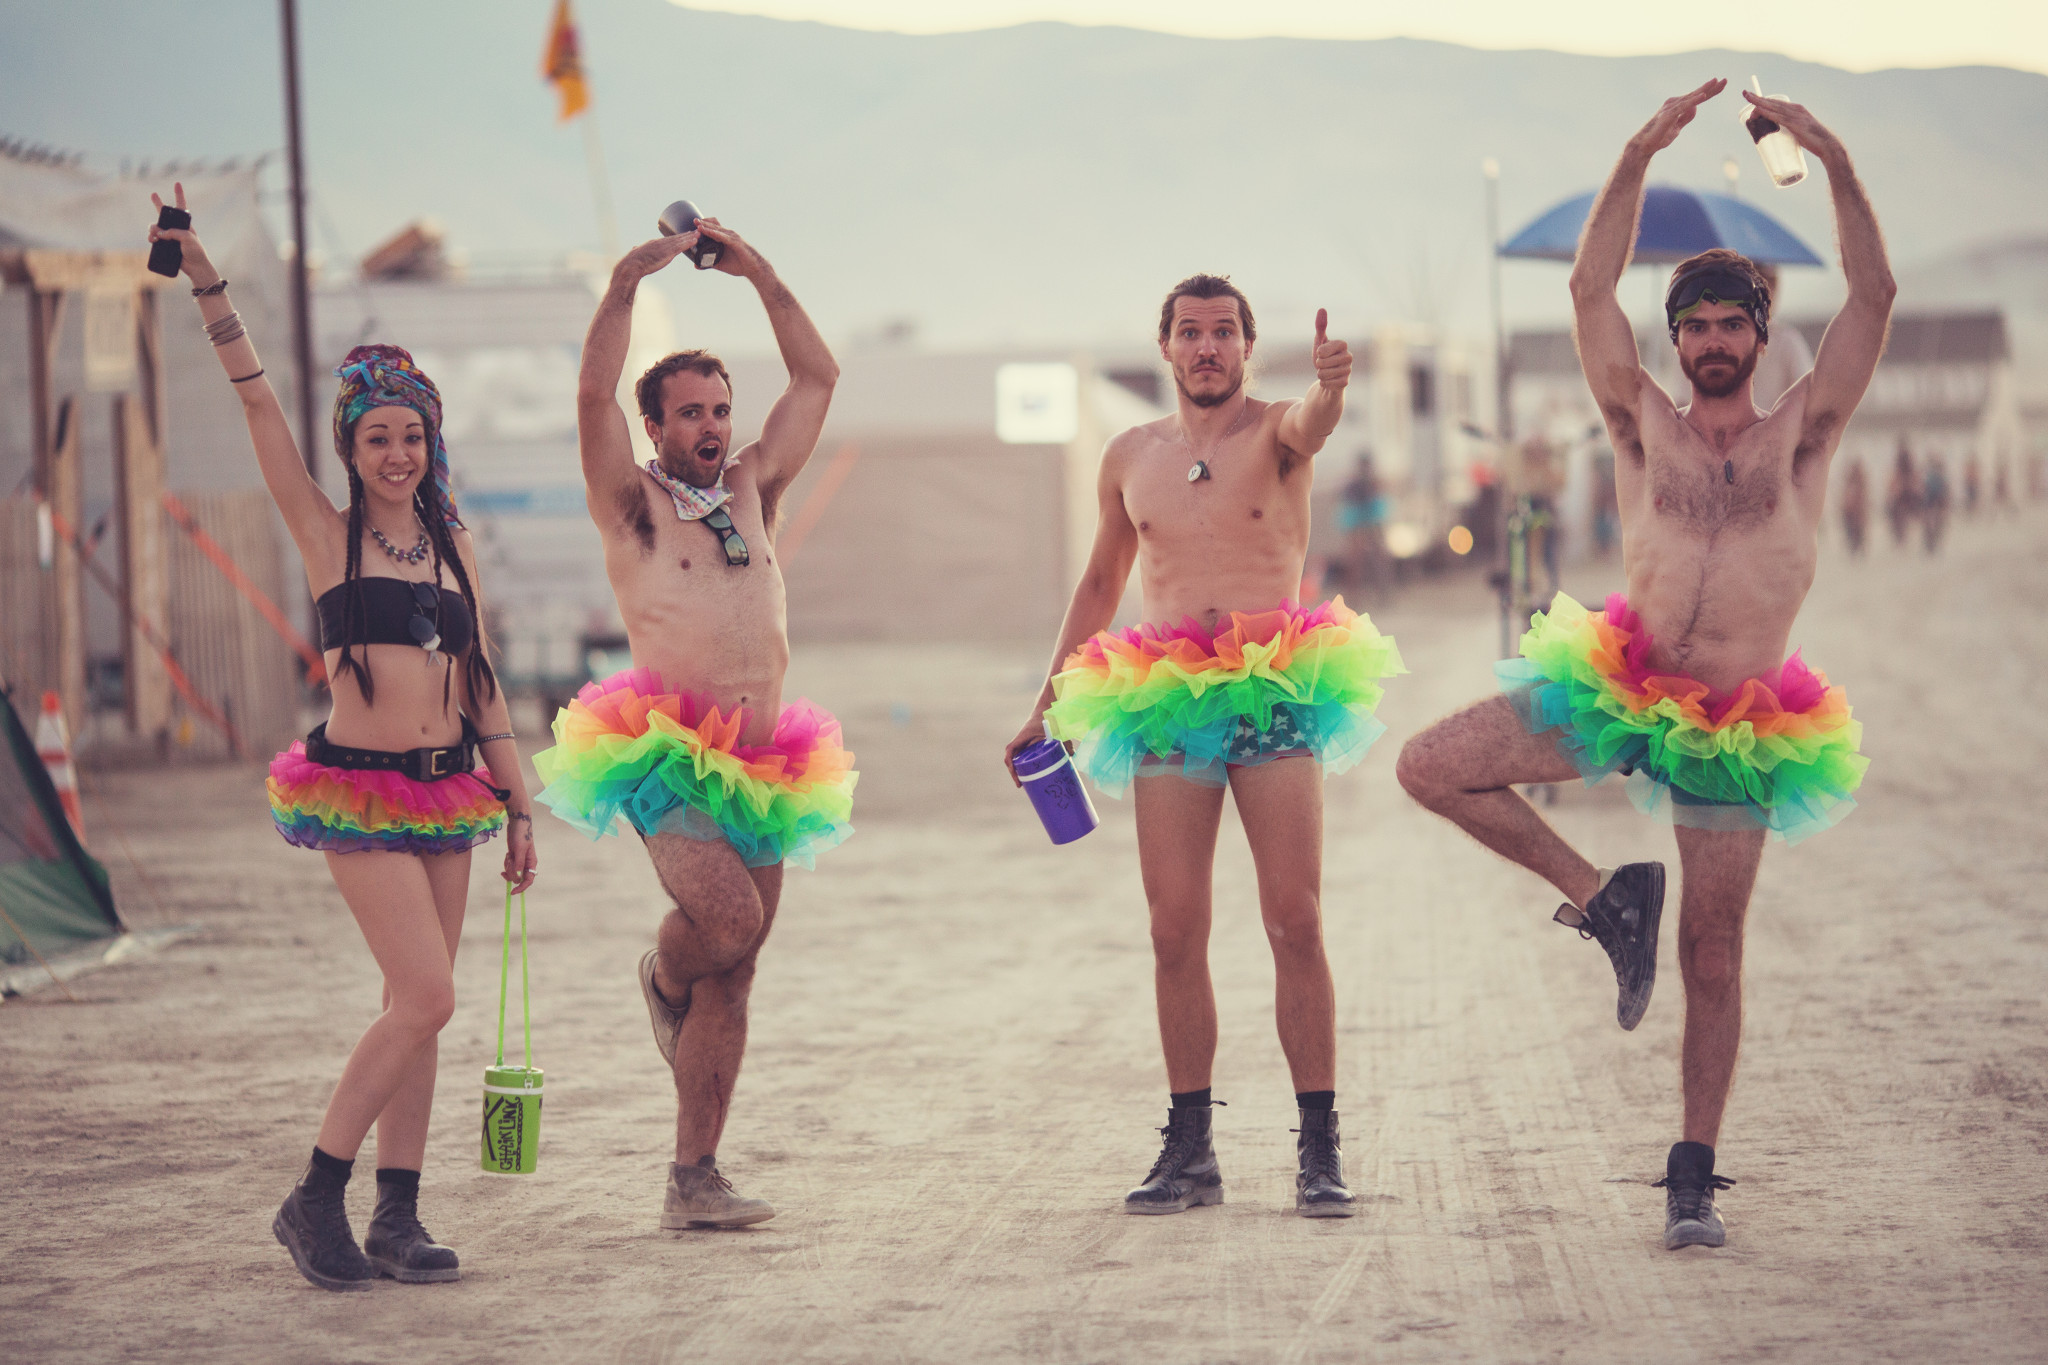 What to Wear on the Playa? A Guide to Burning Man Outfits